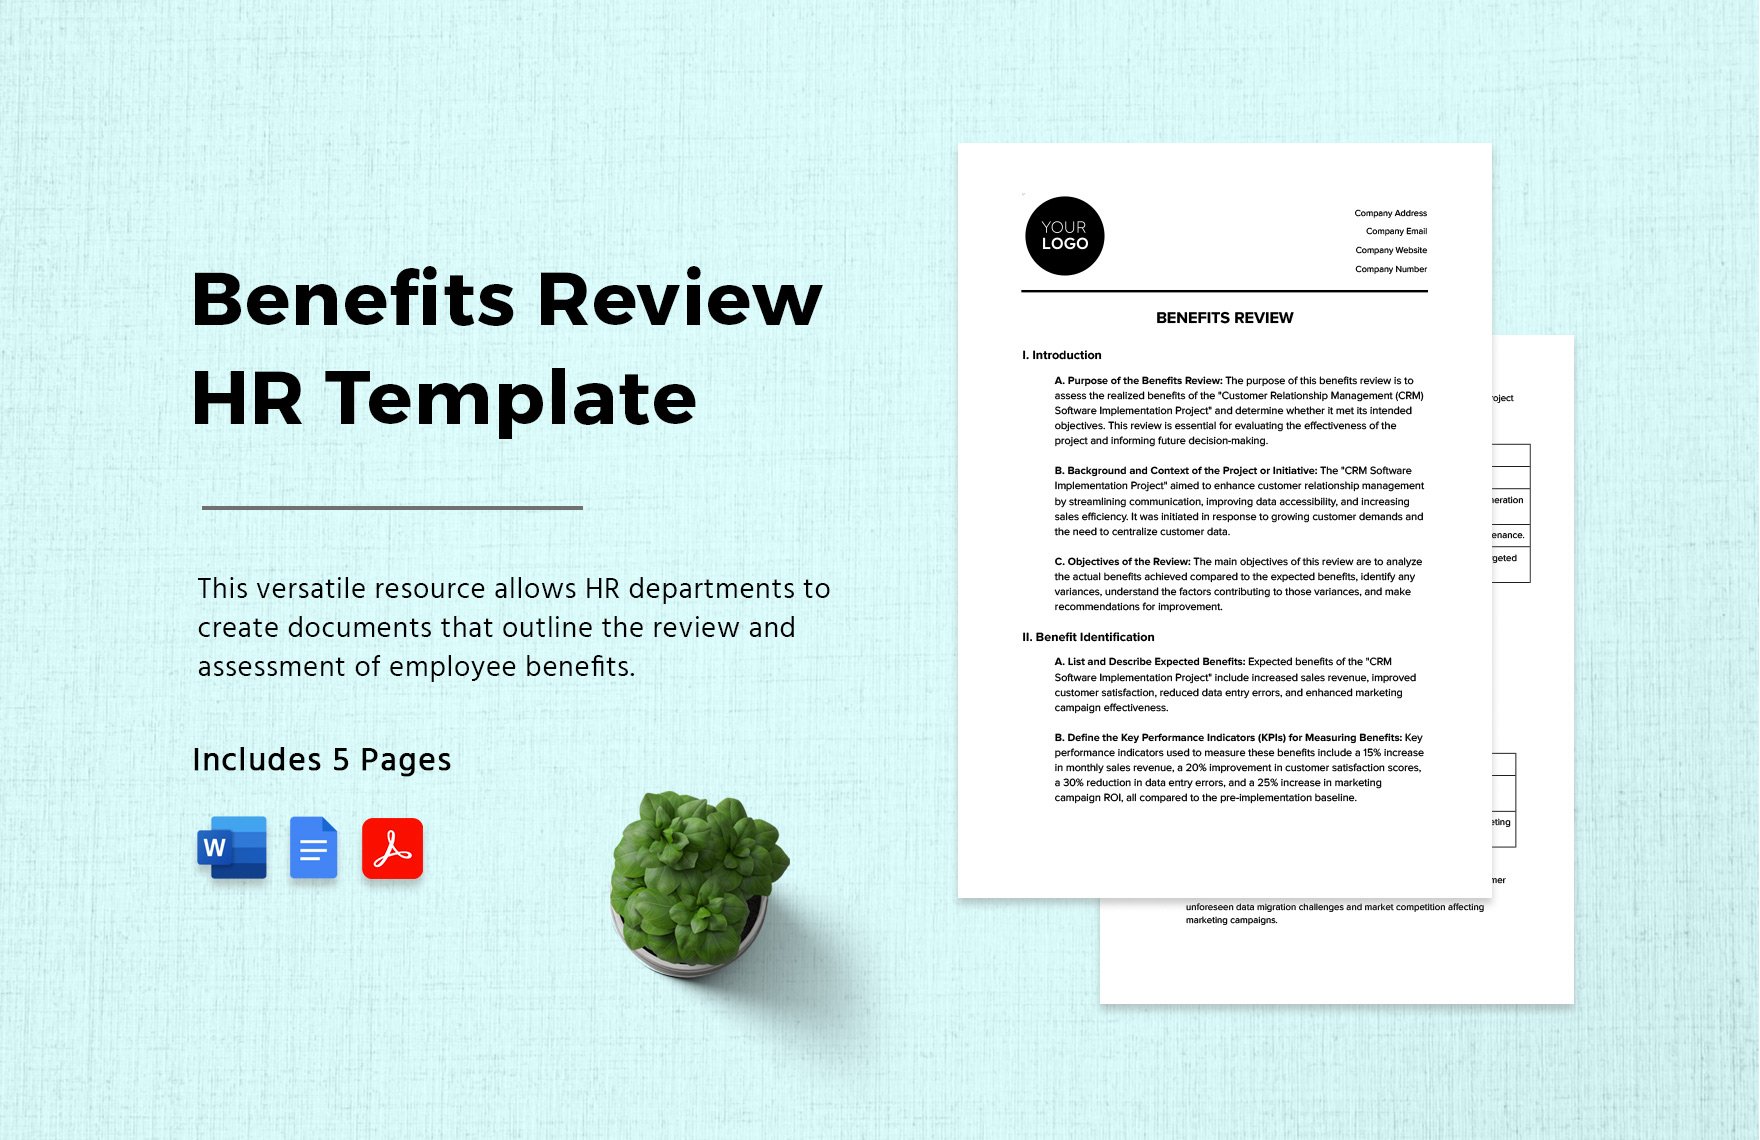 Benefits Review HR Template